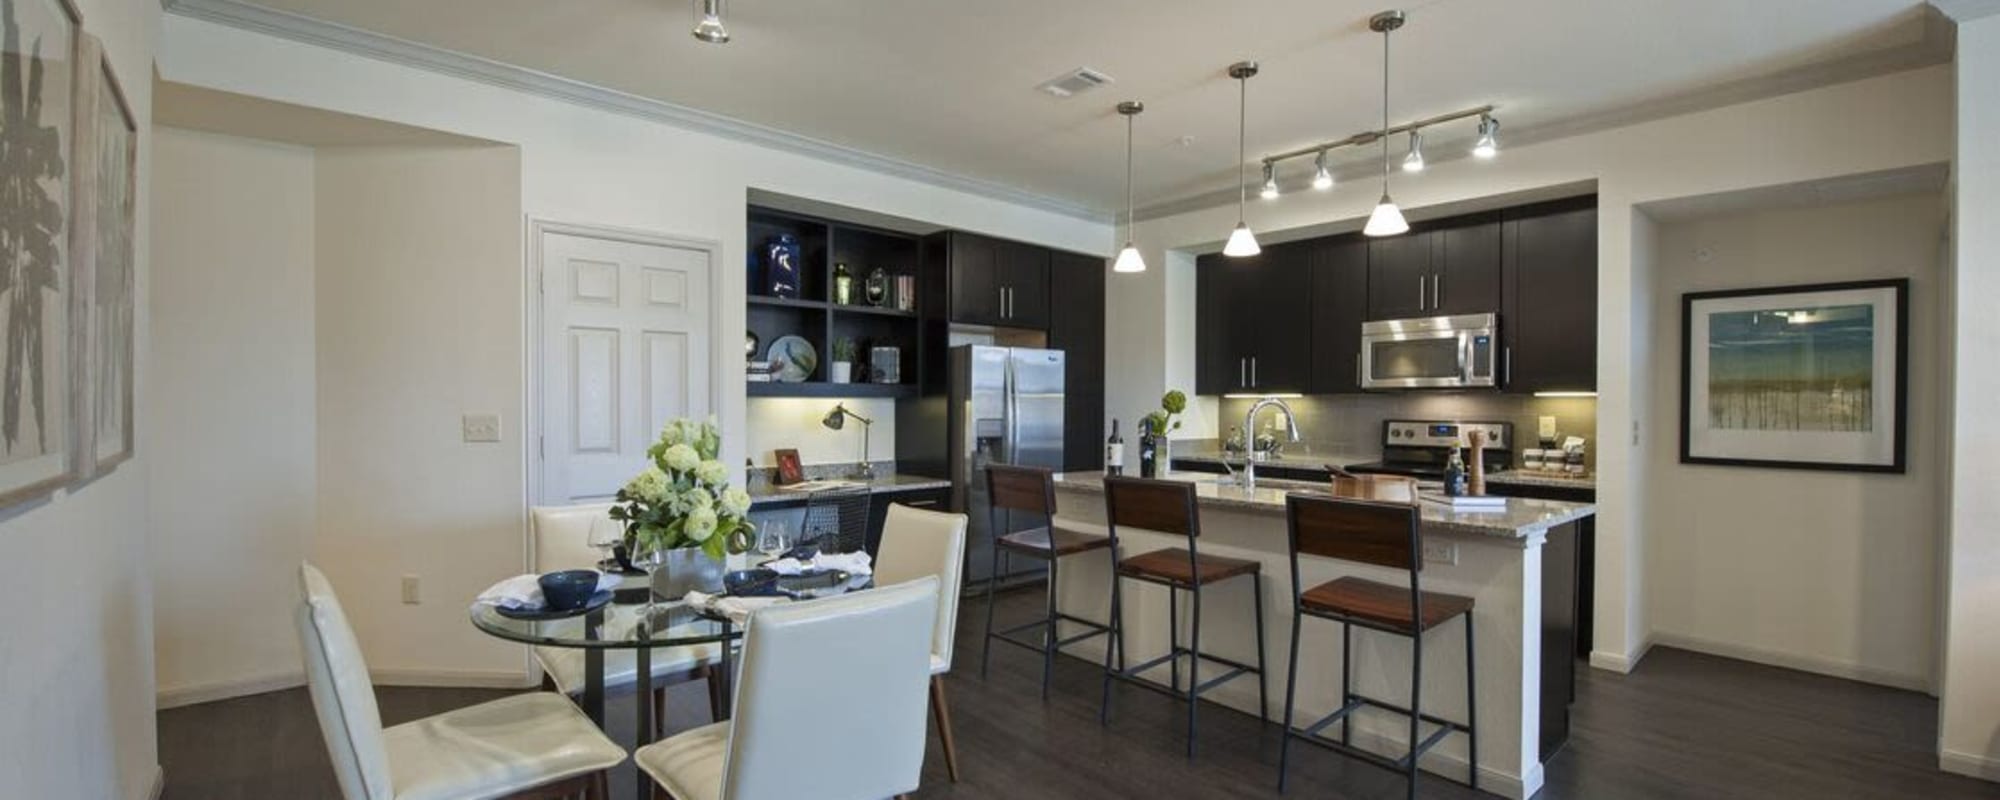 Dining room kitchen combo with a kitchen island at The Crossing at Katy Ranch in Katy, Texas